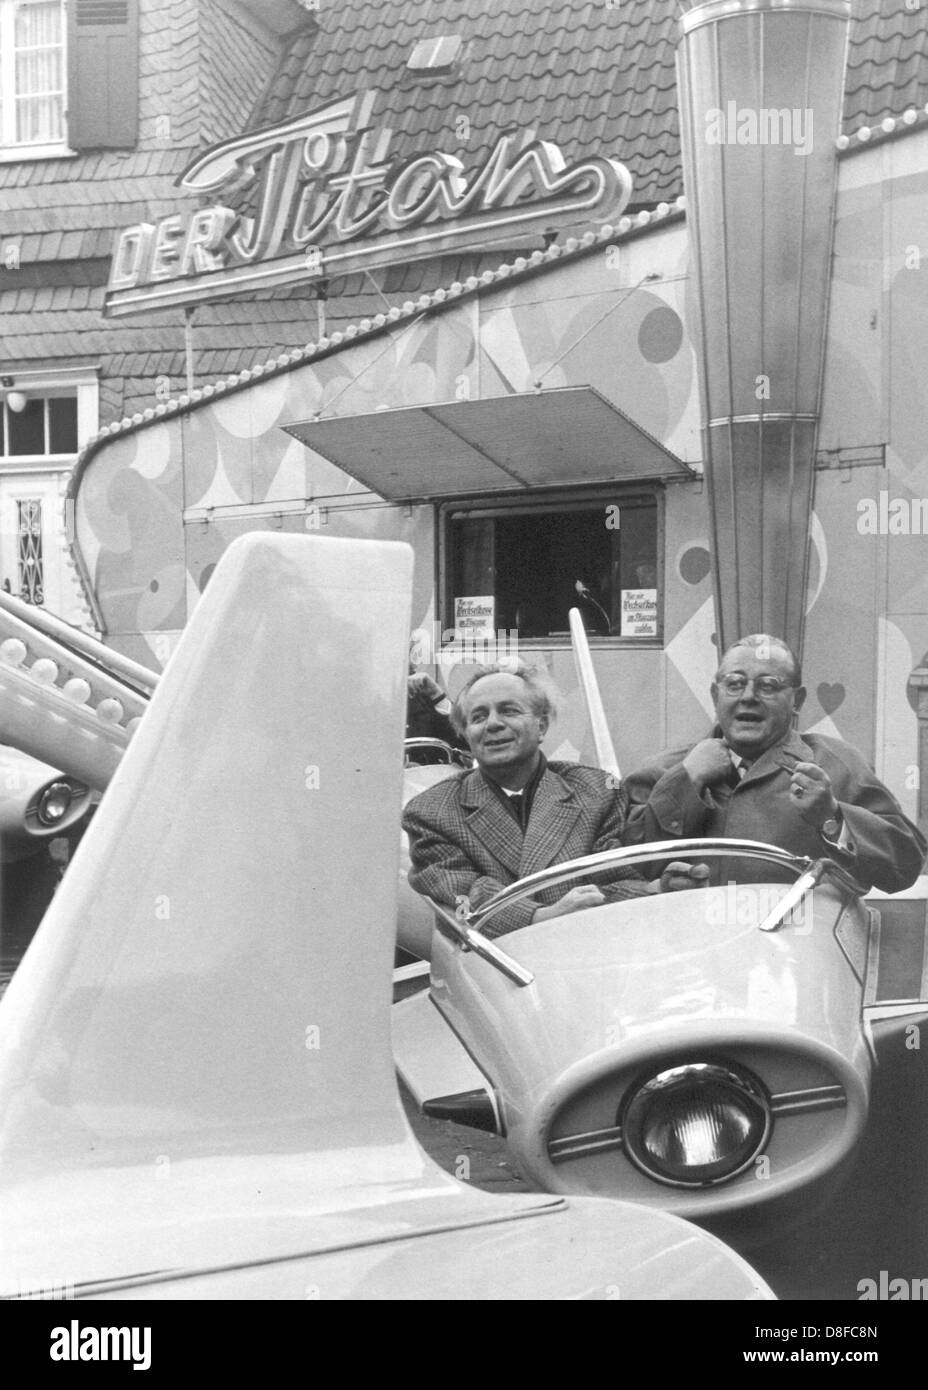 CDU politician, justice minister in Northrhine-Westphalia, and publisher of Westfalenpost, Artur Straeter (r), on 8th September 1962 on a carousel. Stock Photo